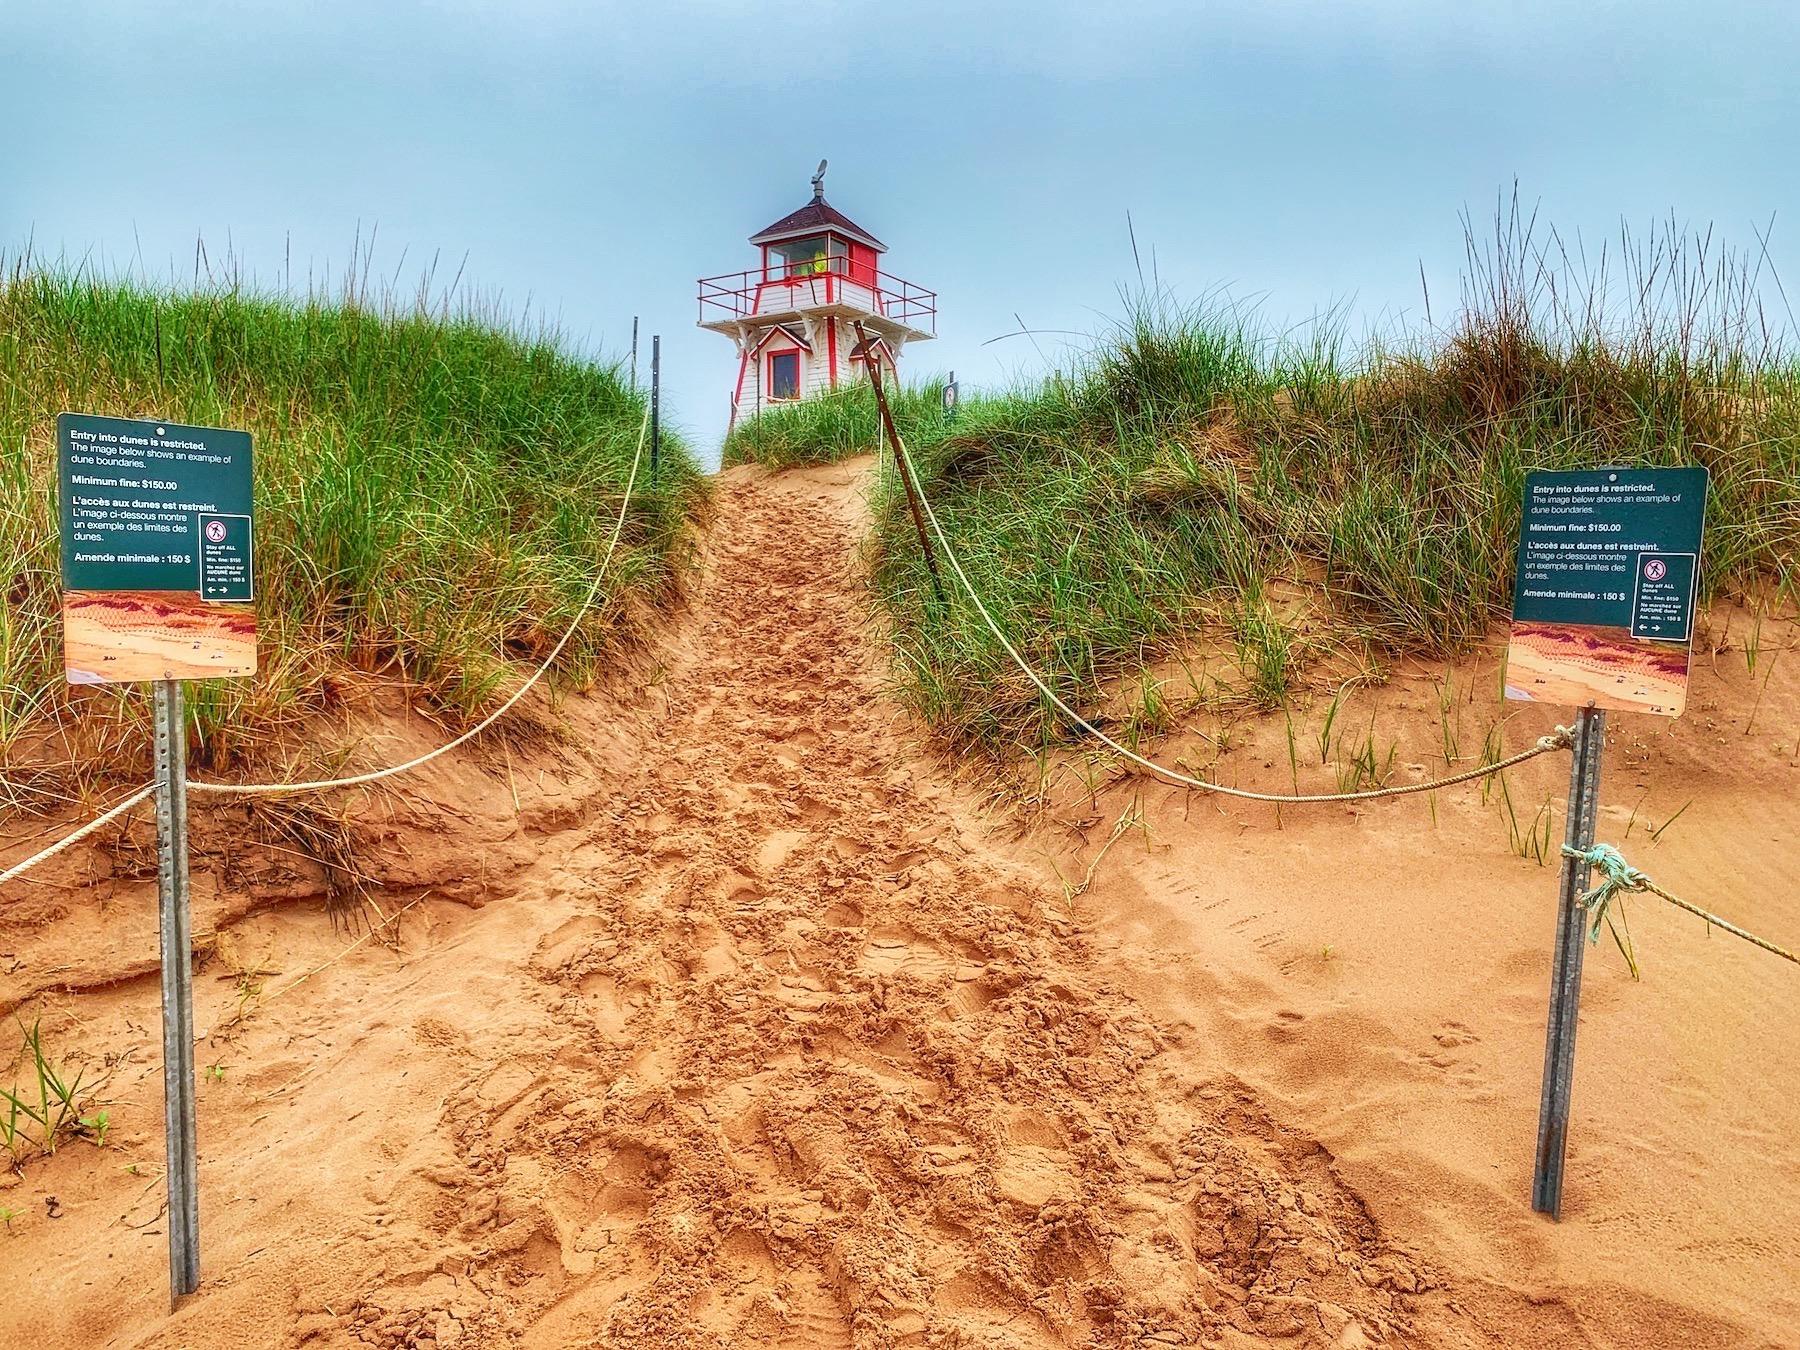 Visitors to Covehead Lighthouse at Prince Edward Island National Park are kept off the sand dunes on the path to the beach.